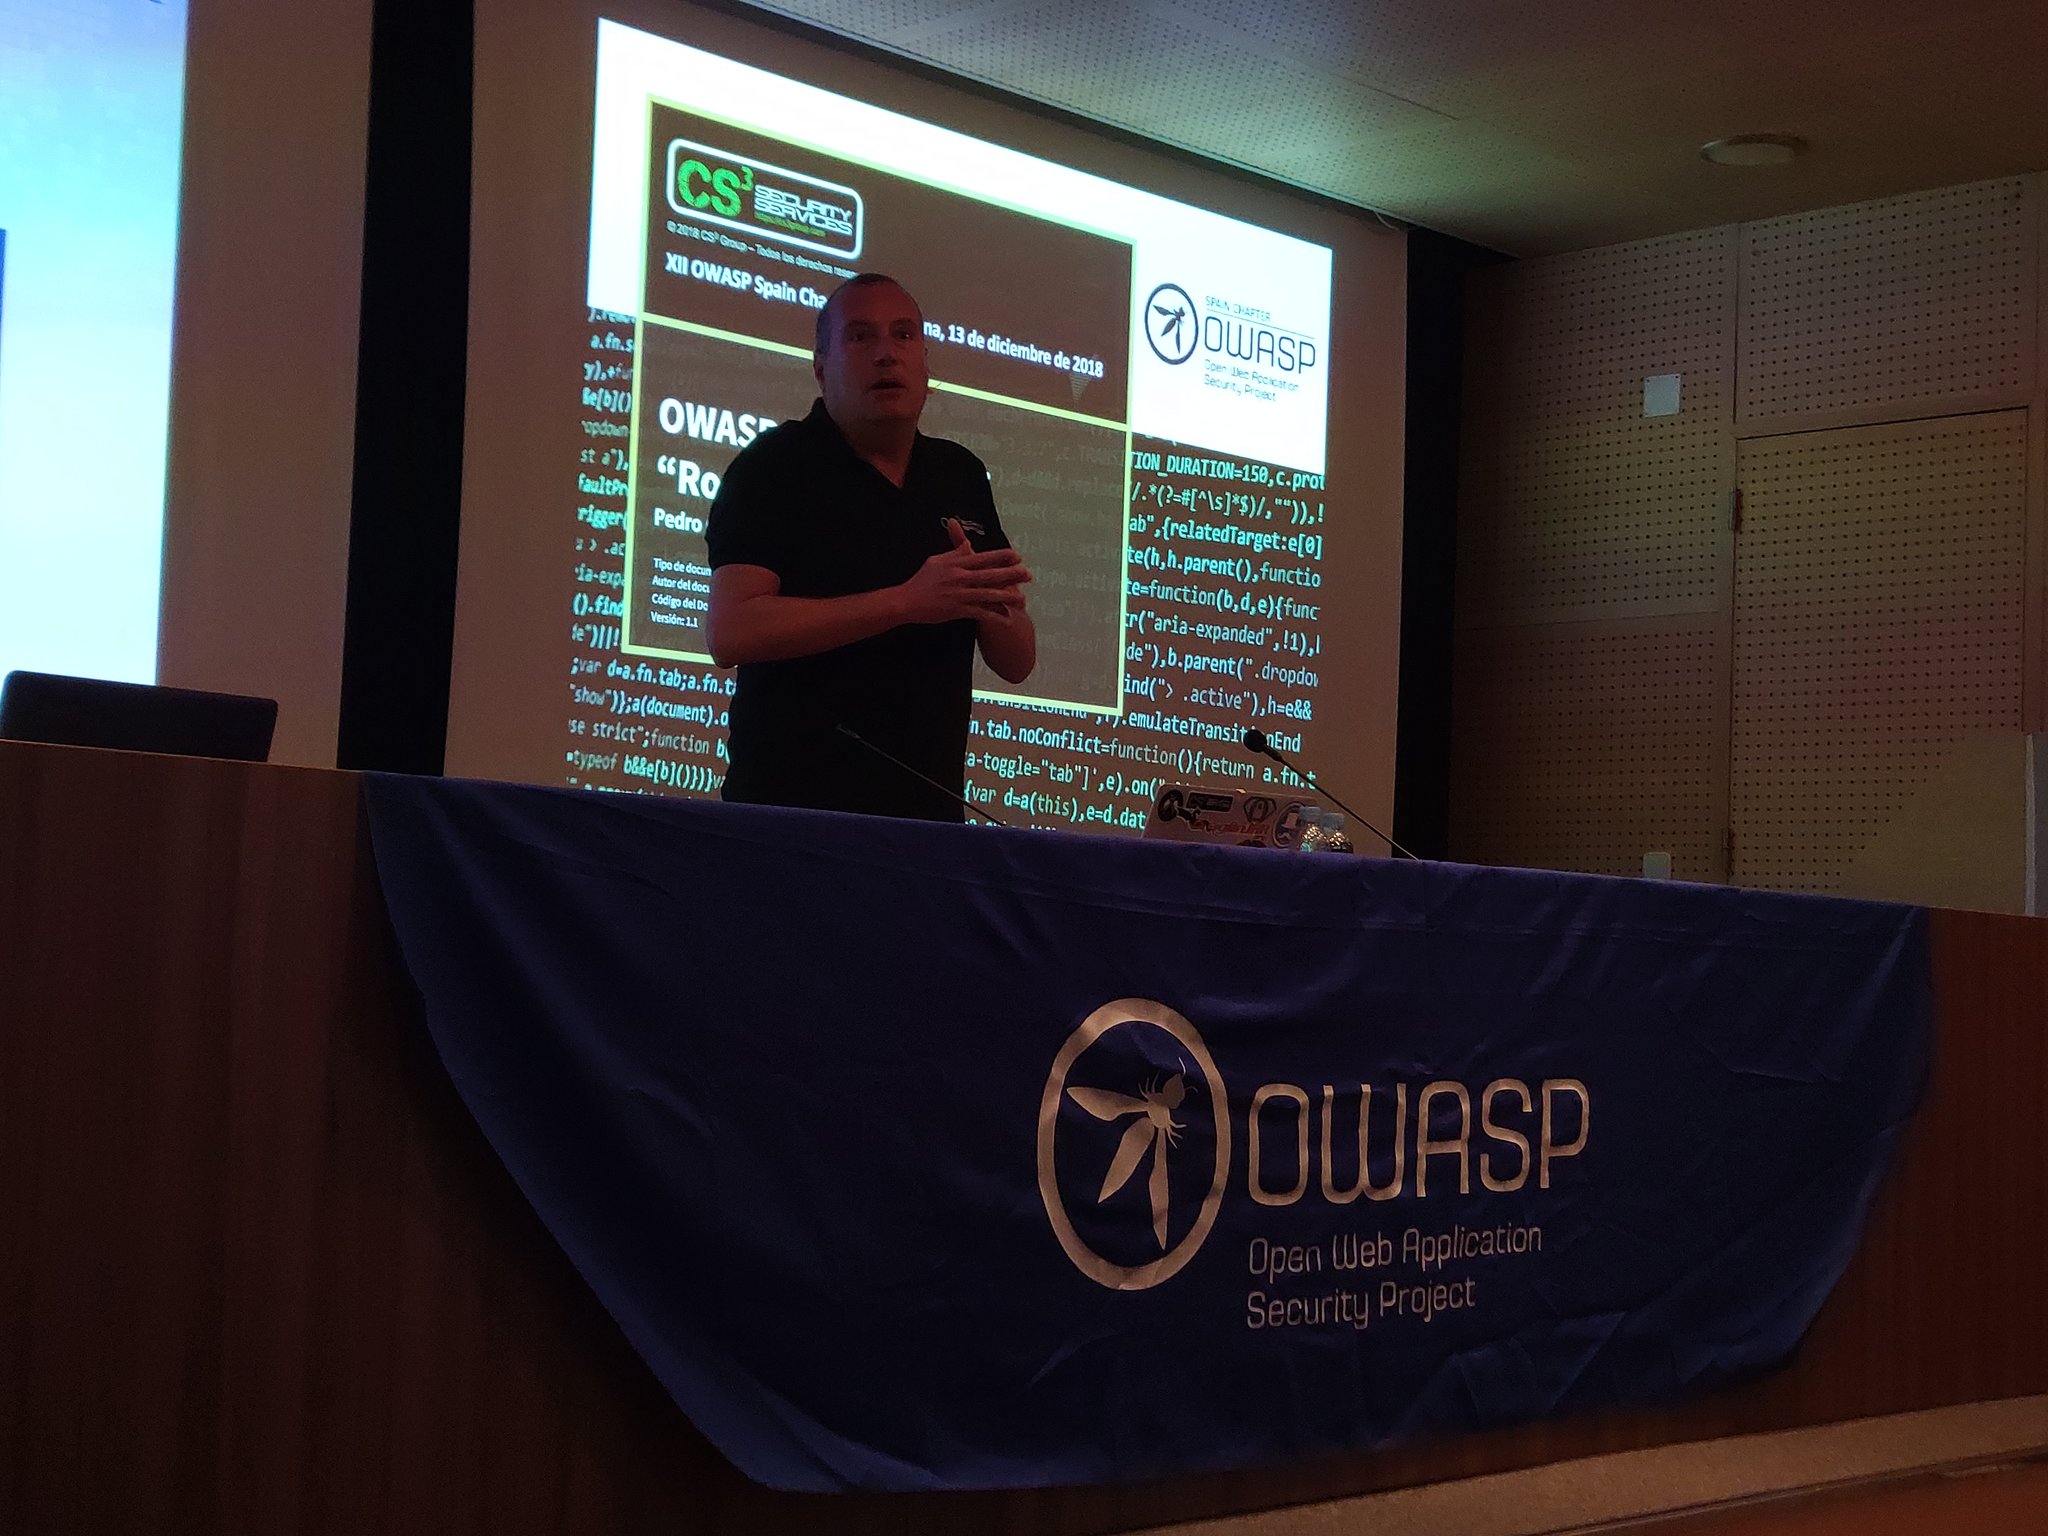 XII OWASP Spain Chapter